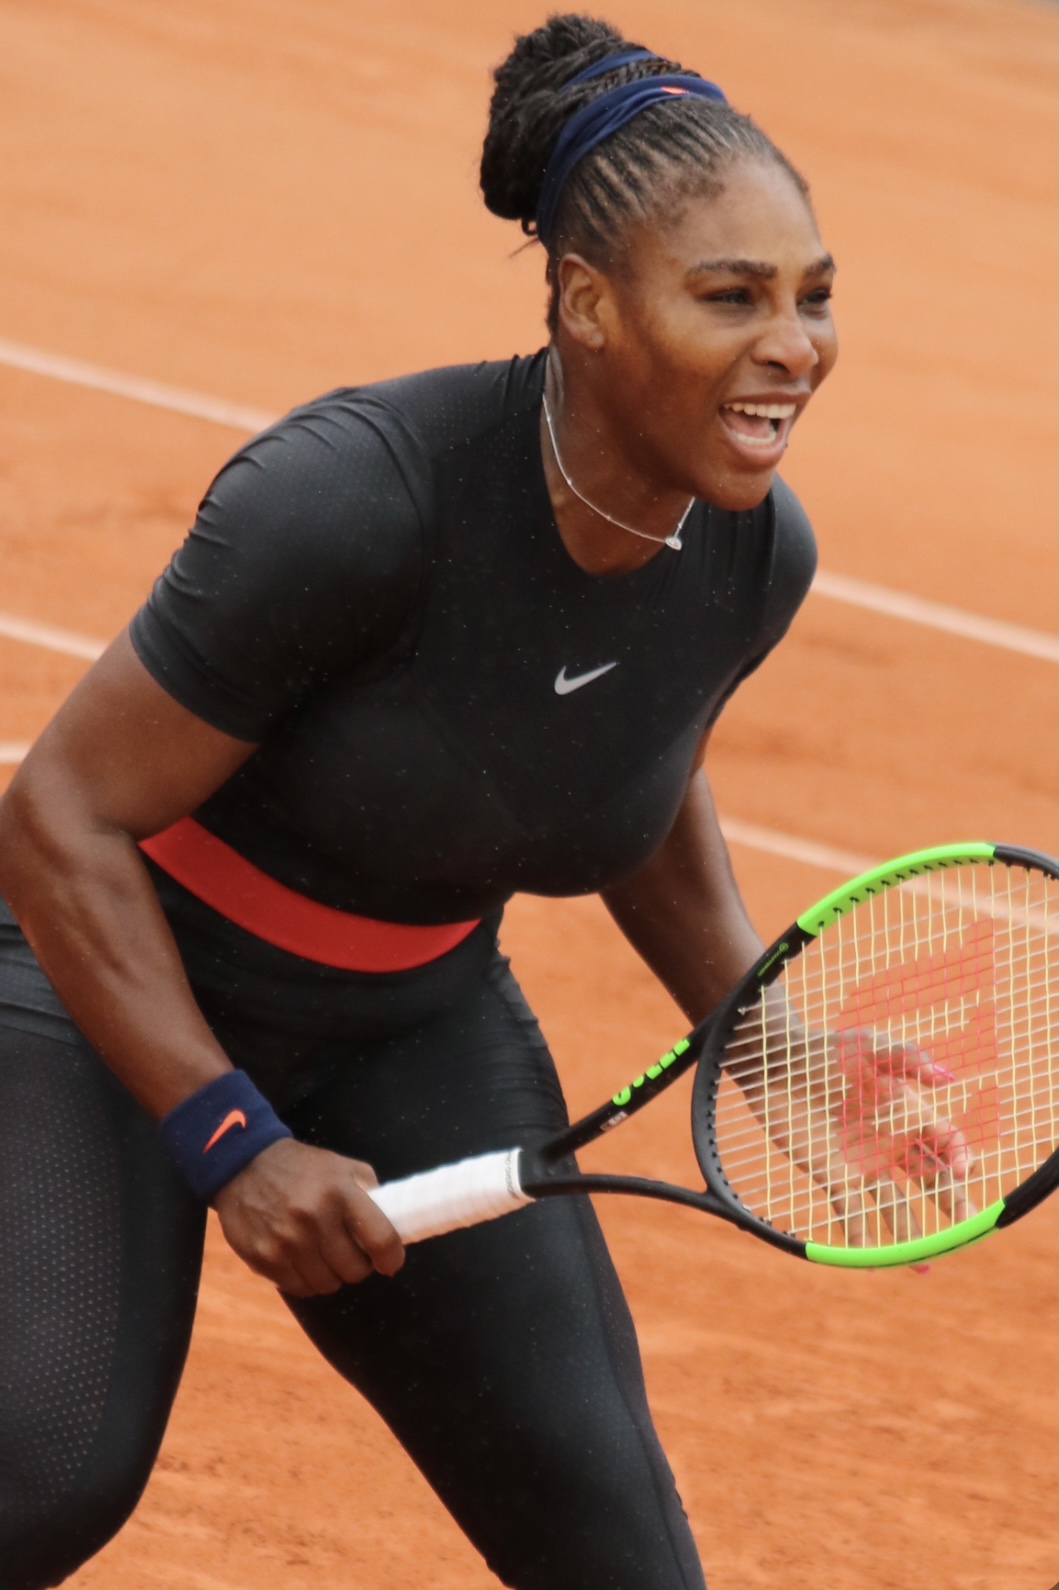 Serena Williams Wearing a Full Body Suit at the 2018 French Open